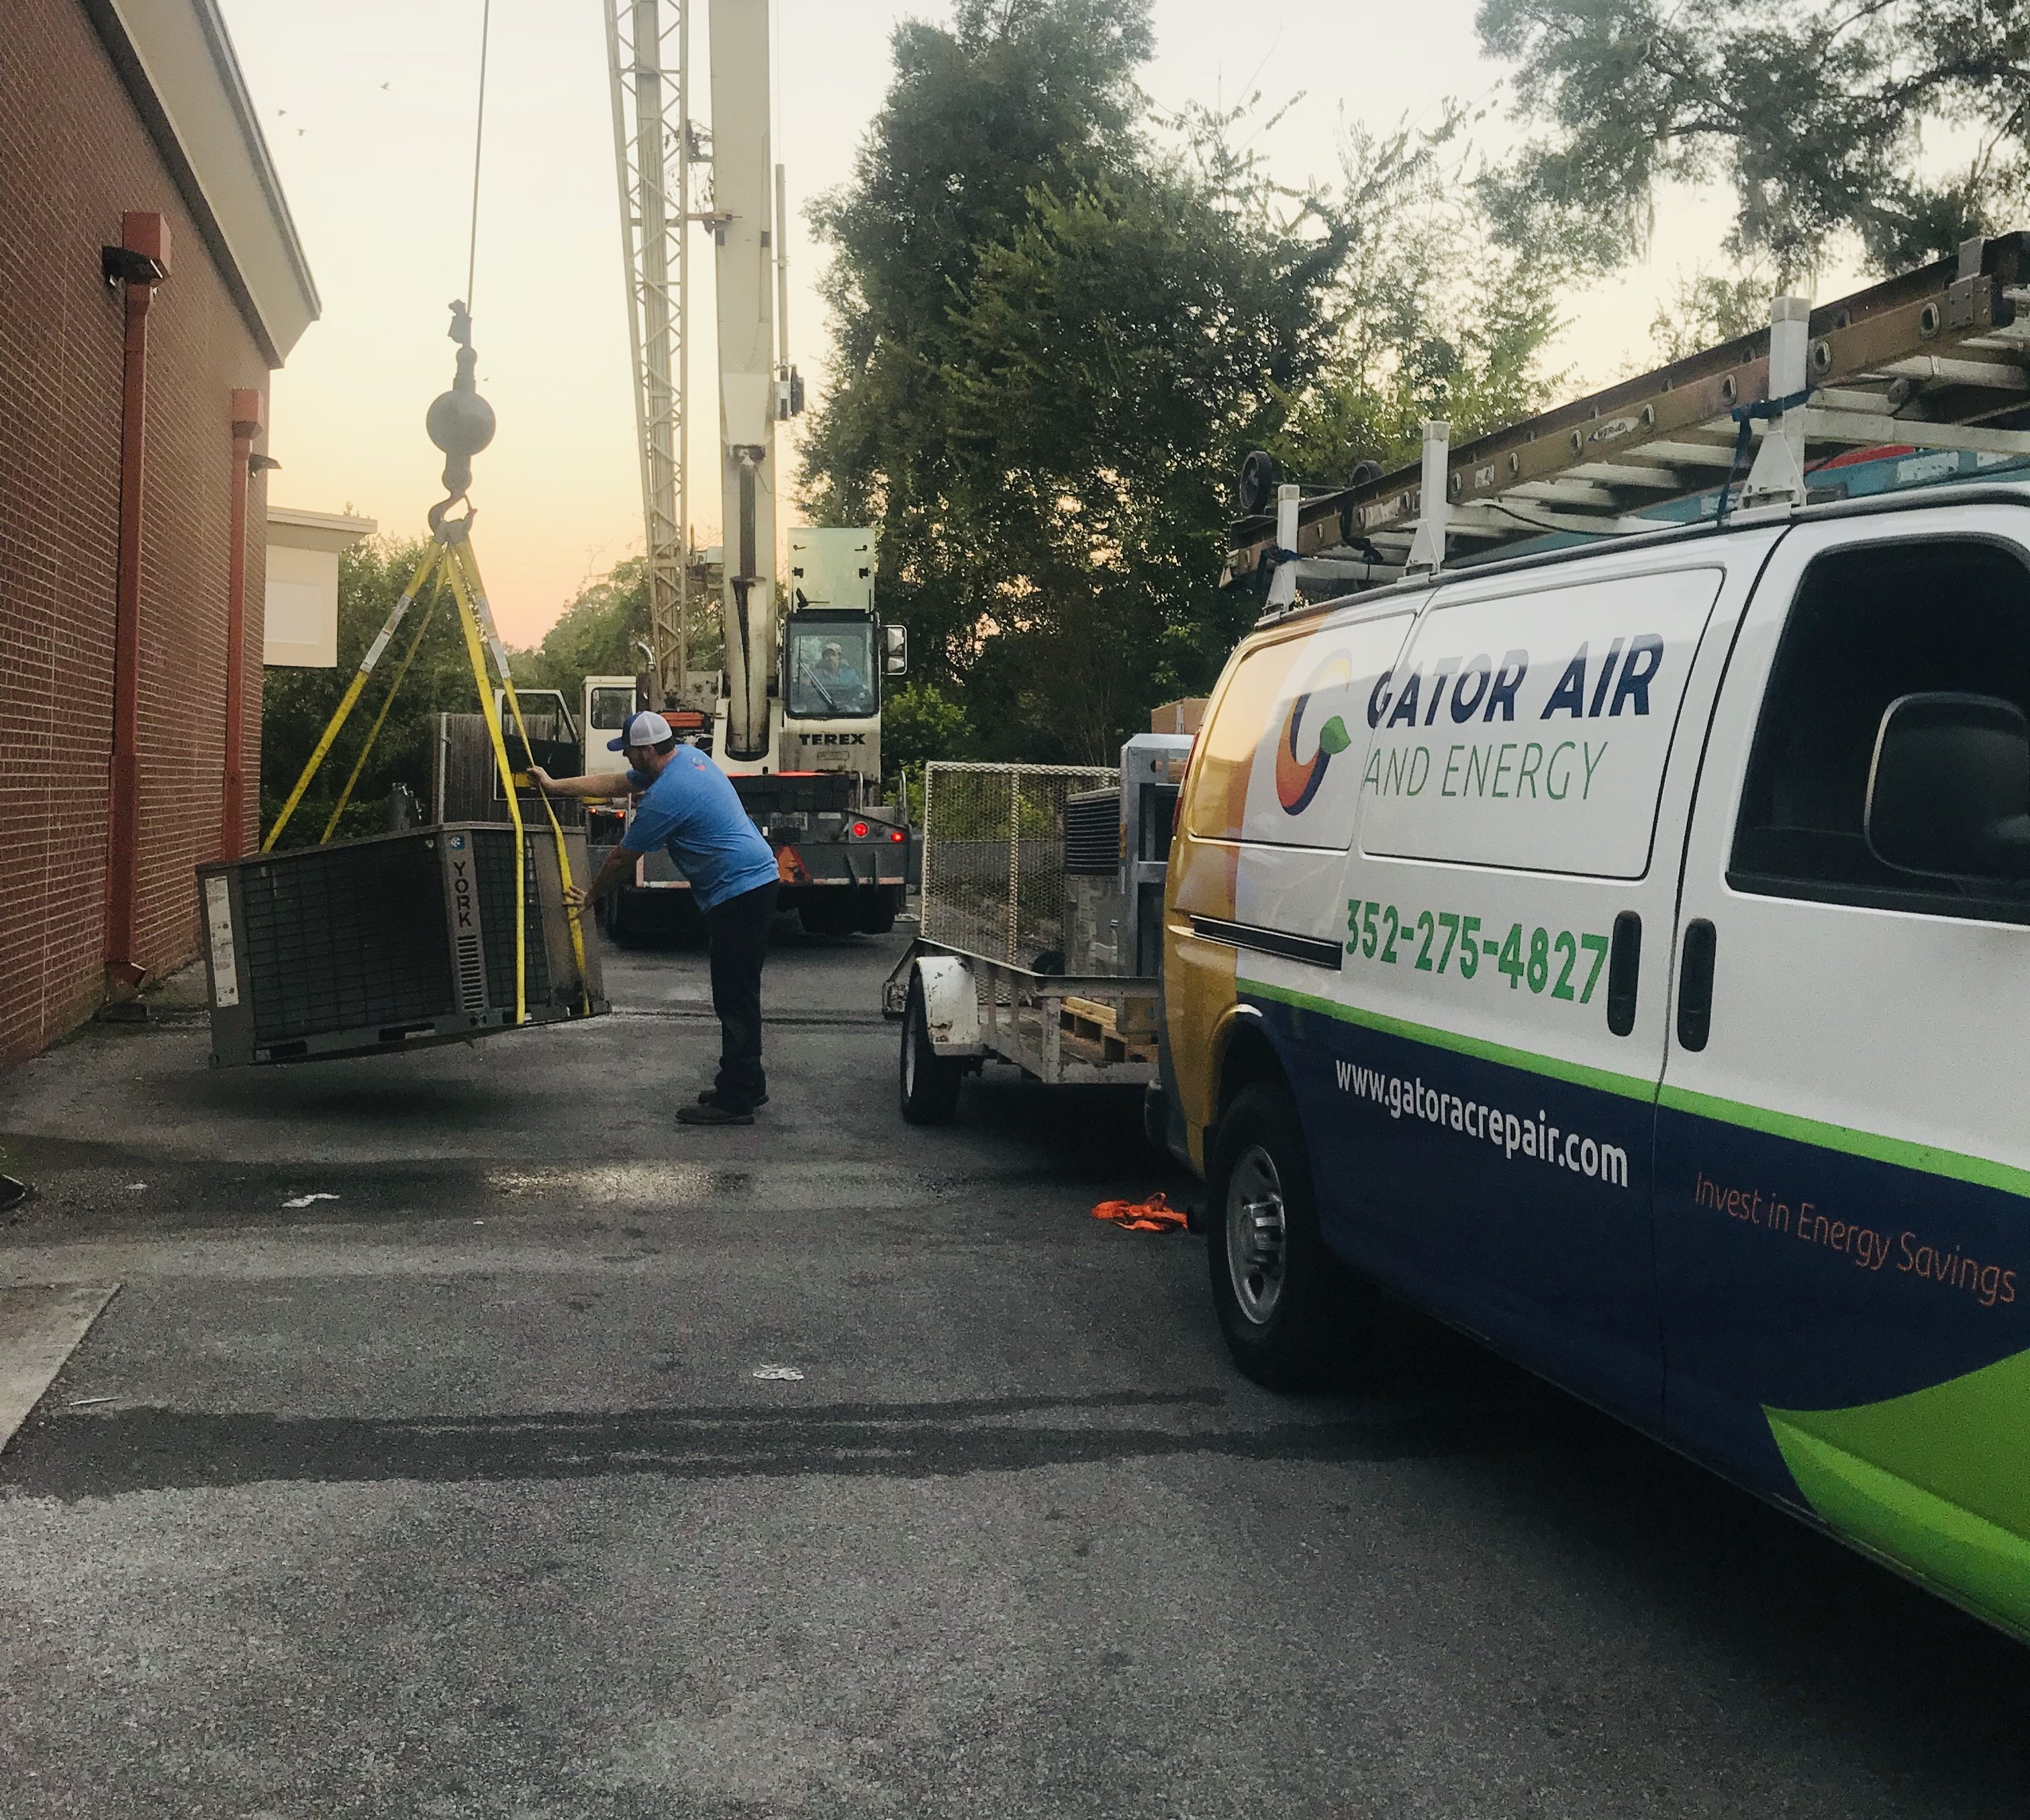 Commercial air conditioners - a crane delivering an unit to the top of a building.commercial HVAC installation repair maintenance Gator Air & Energy Gainesville FL